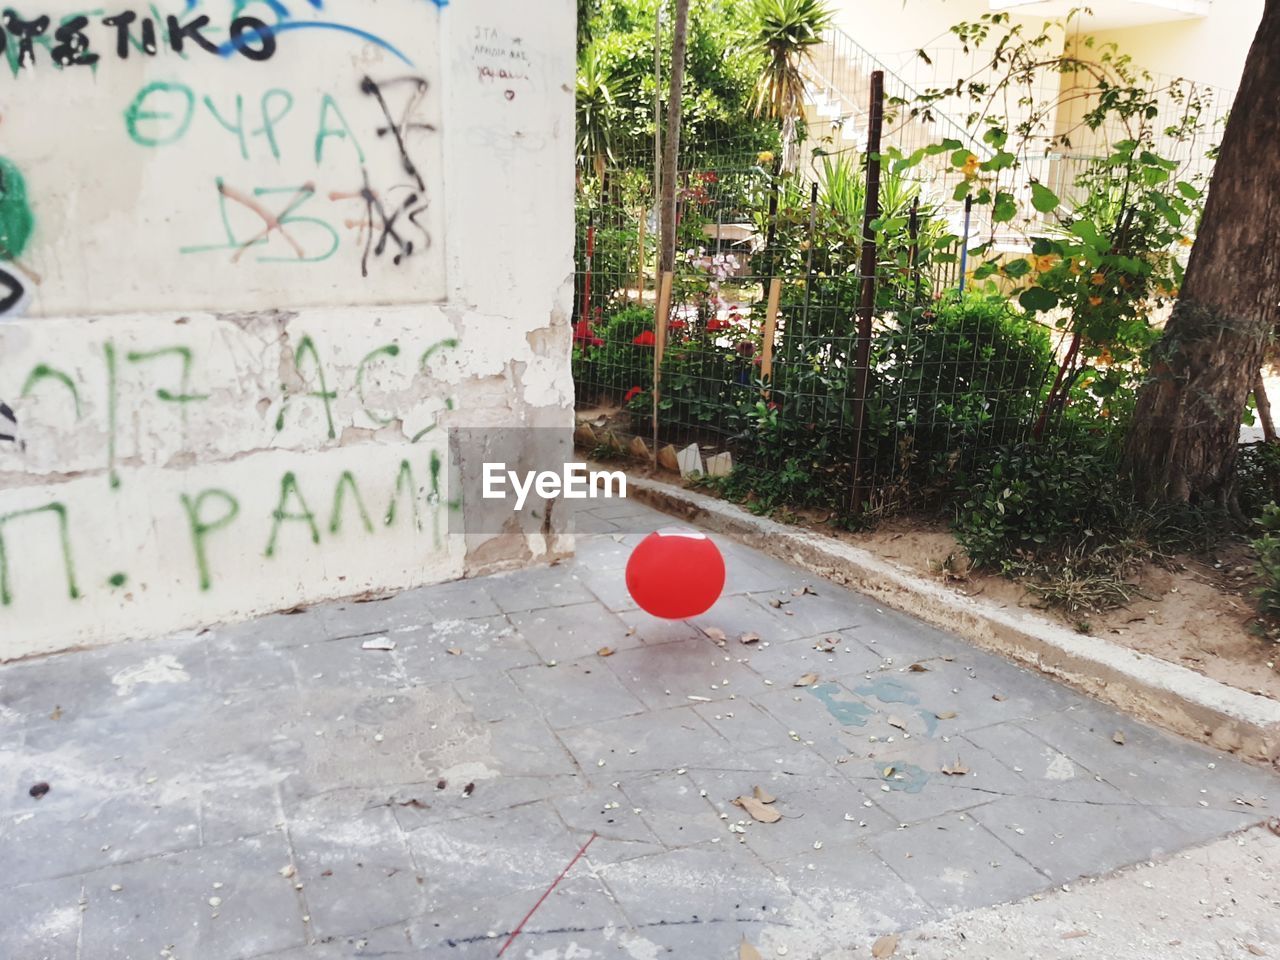 VIEW OF RED BALL AND PLANTS ON FOOTPATH